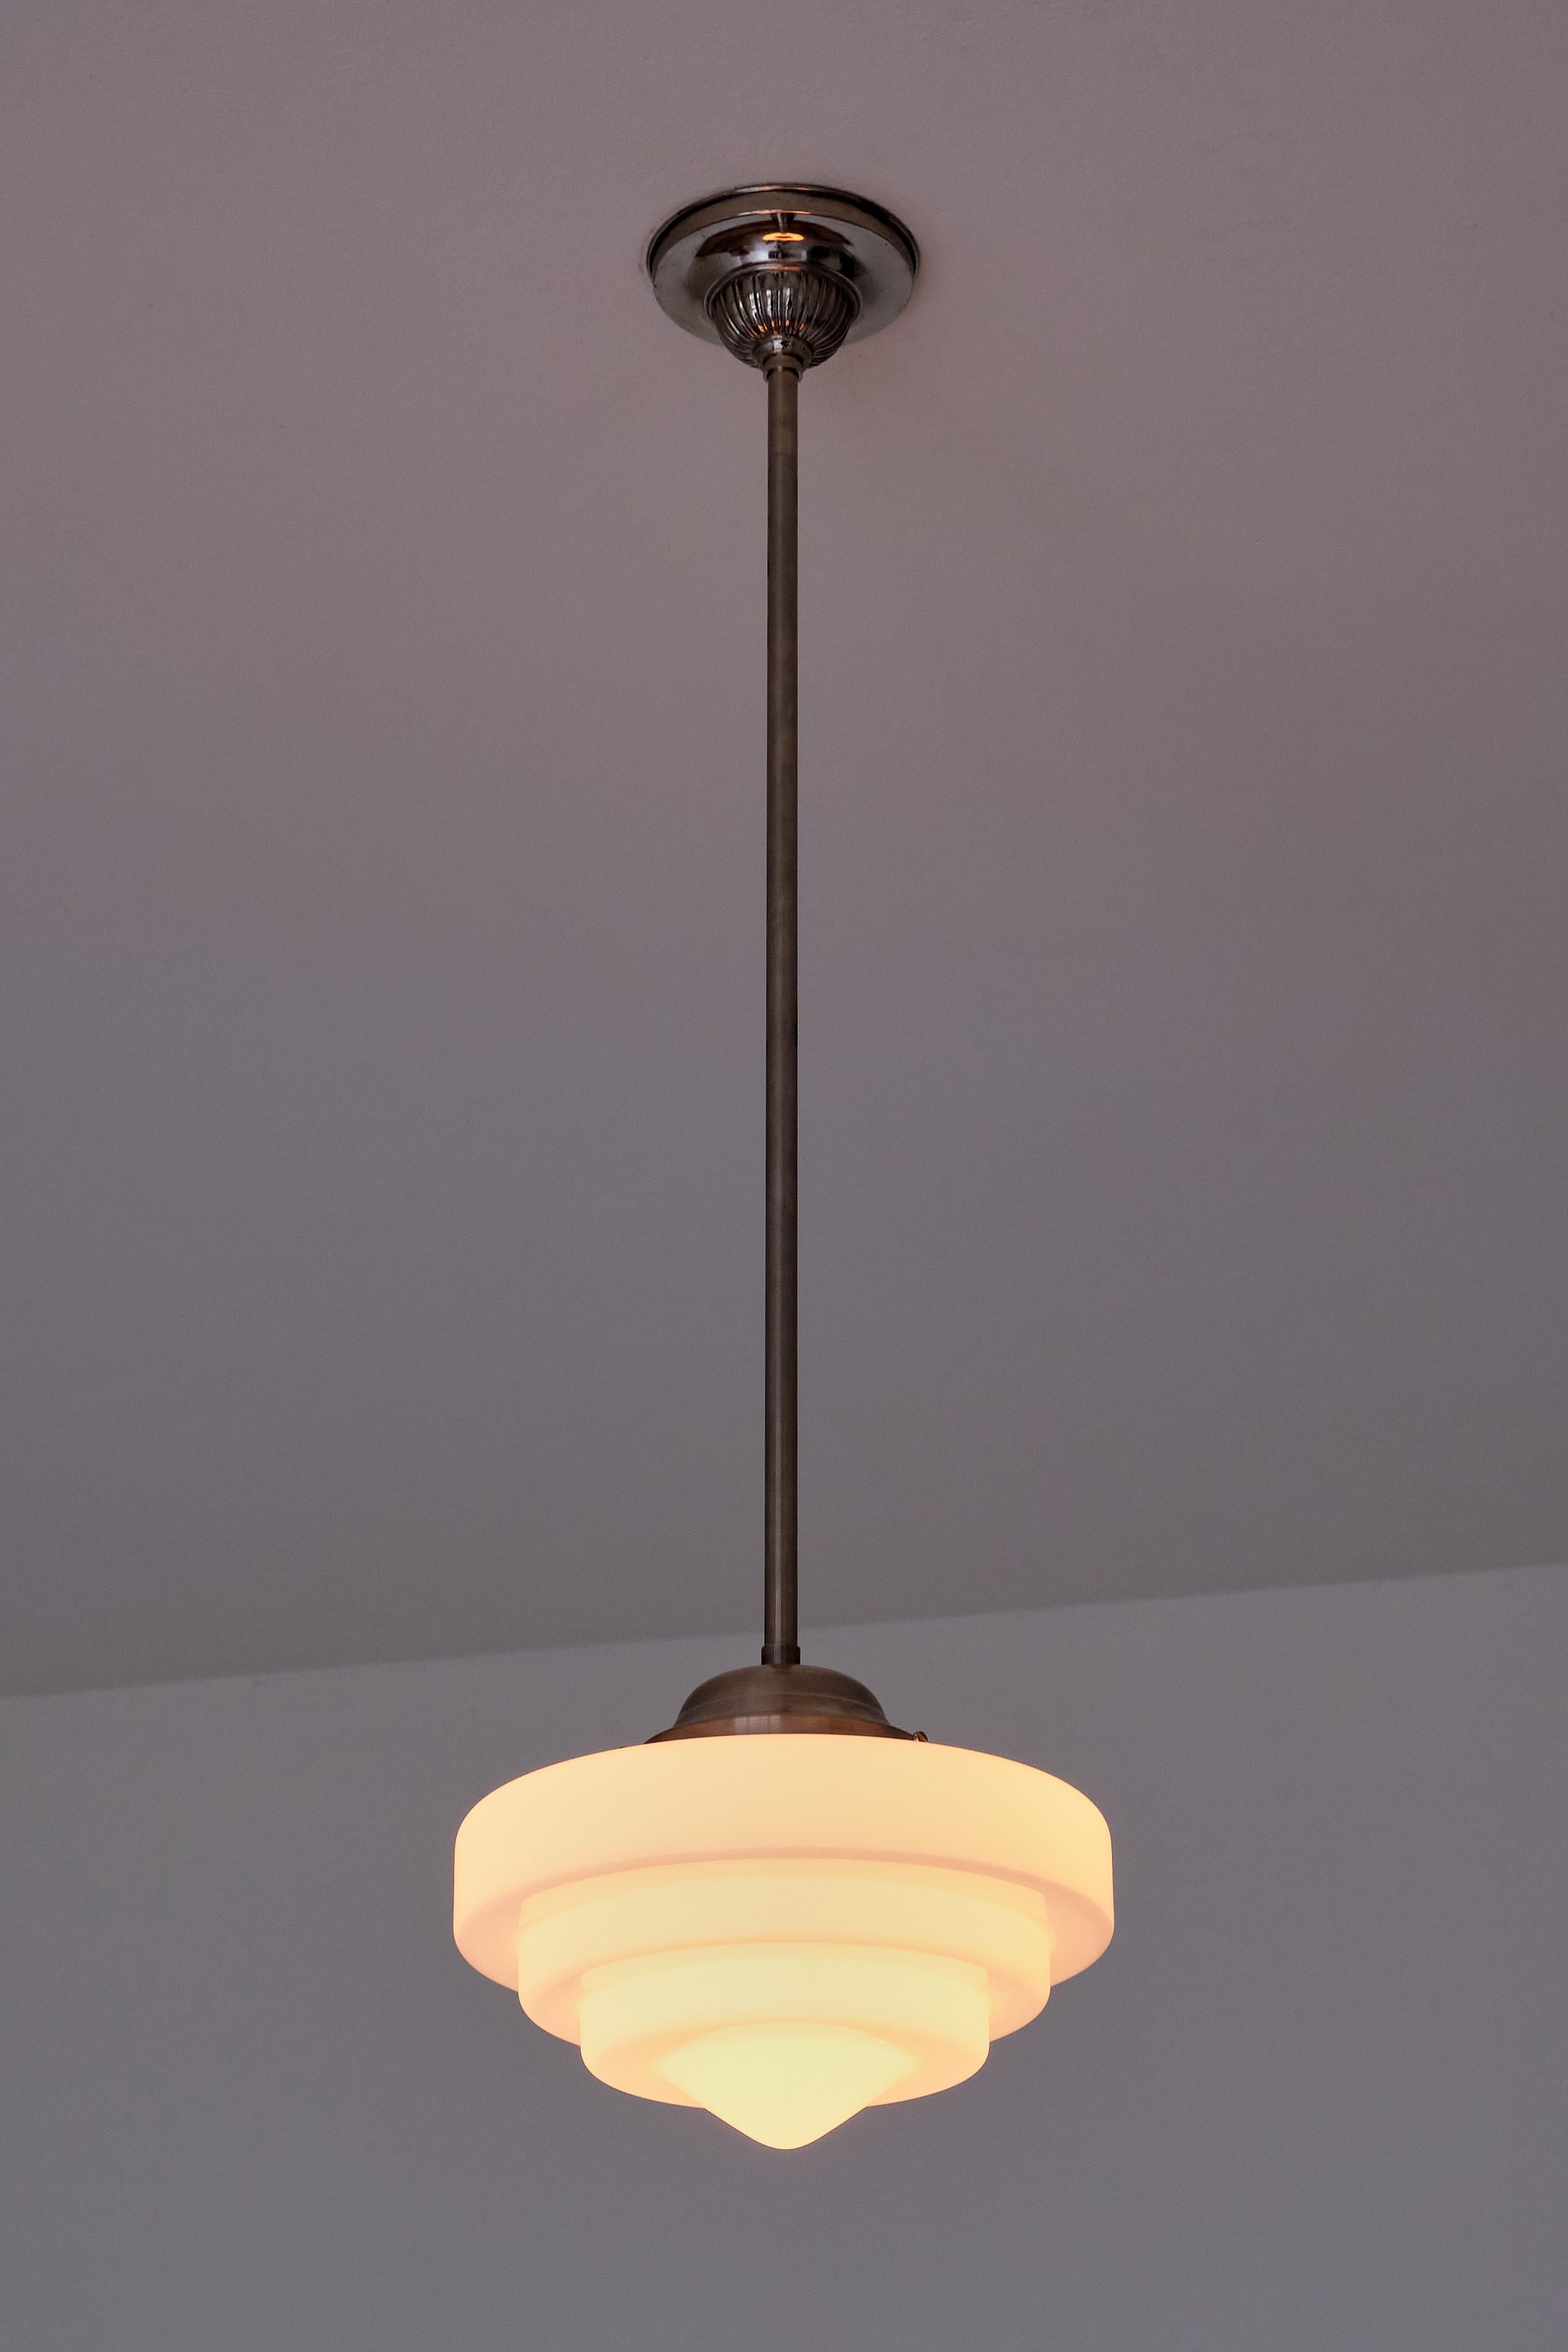 Gispen Art Deco Tiered Pendant Light in Opal Glass and Nickel, Netherlands, 1950 In Good Condition For Sale In The Hague, NL